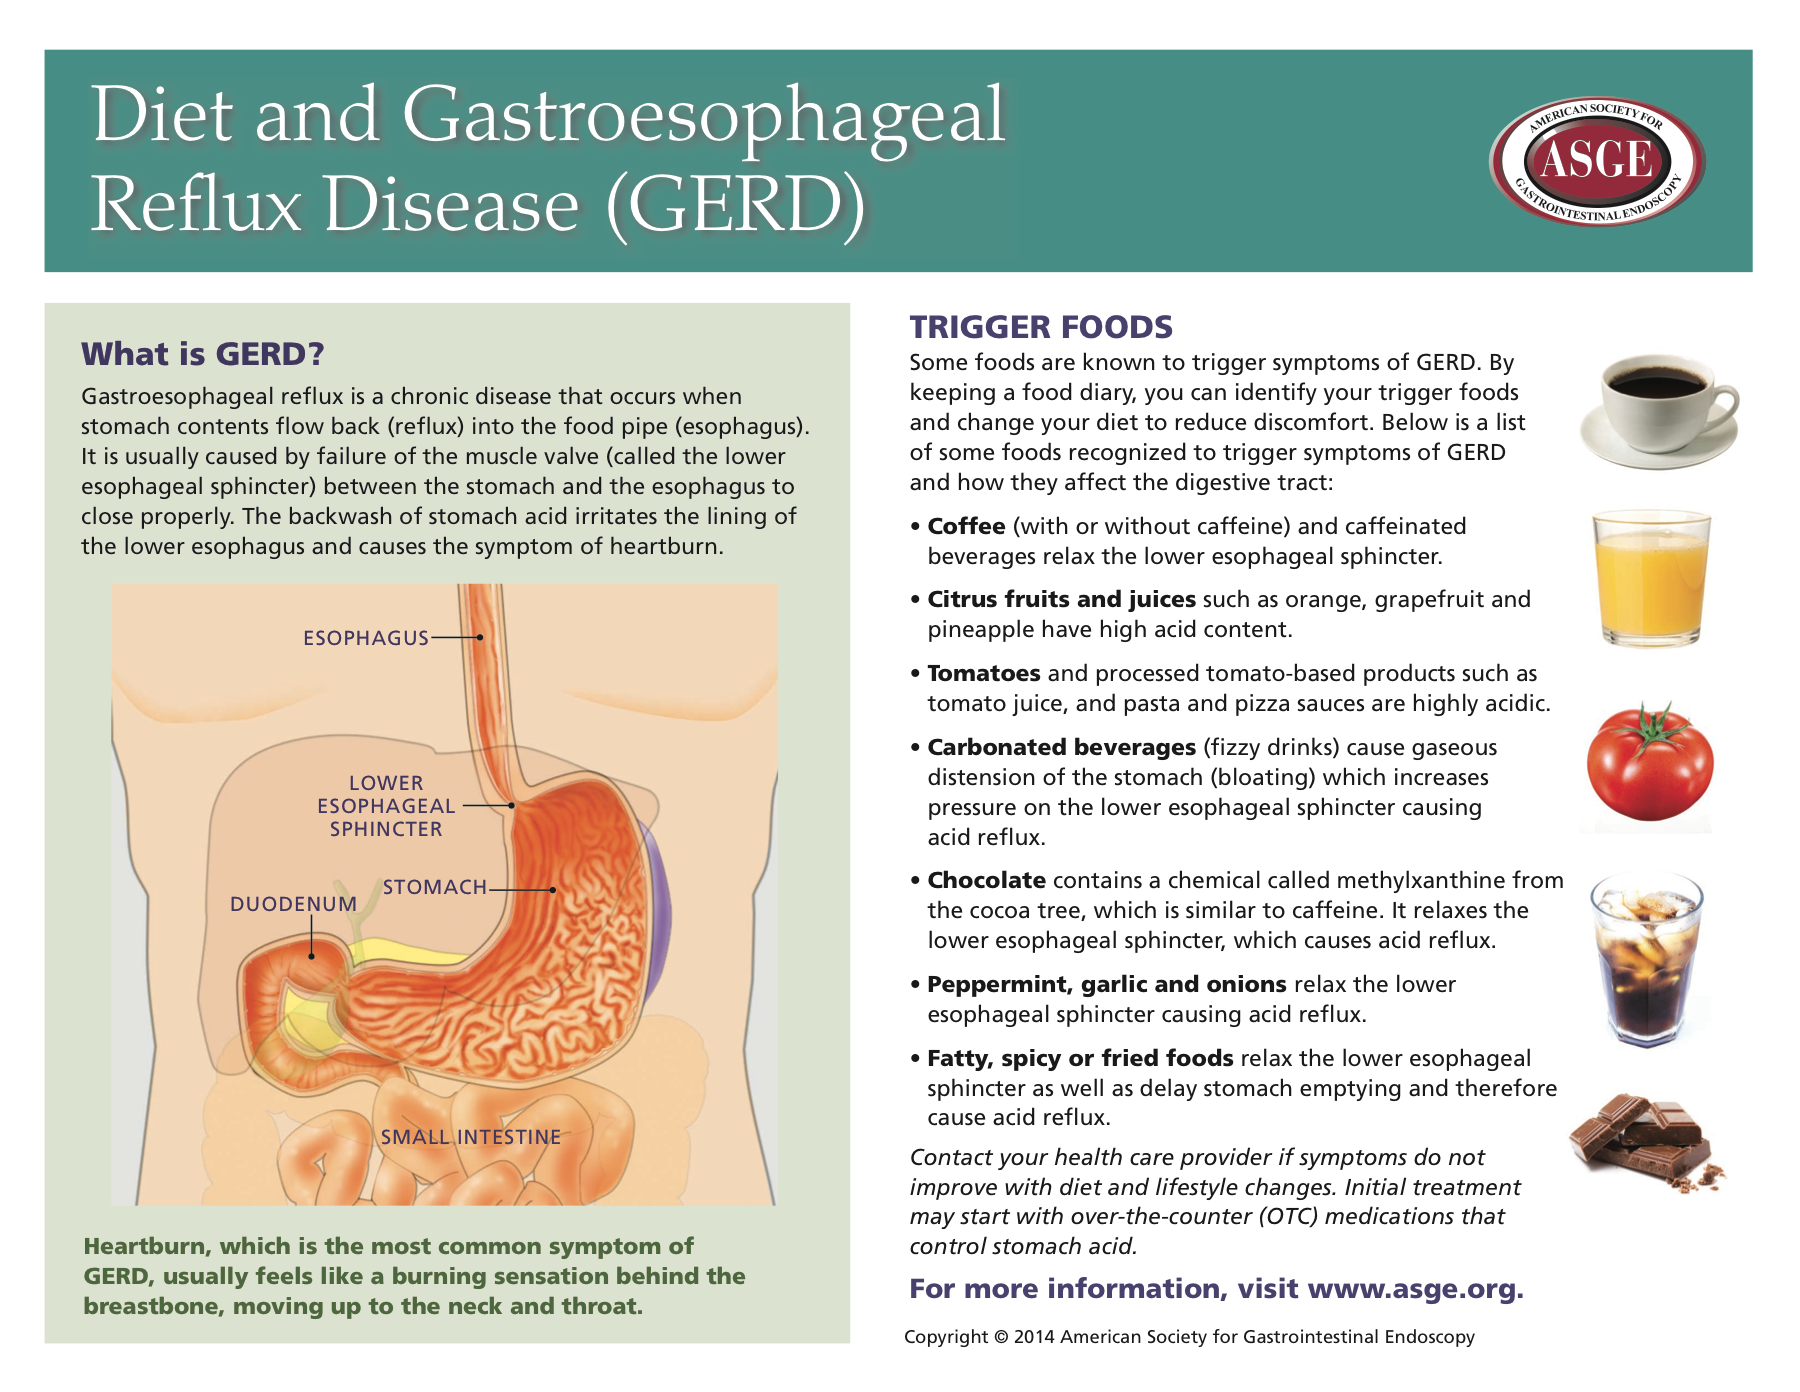 asge | infographic: diet and gastroesophageal reflux disease (gerd)